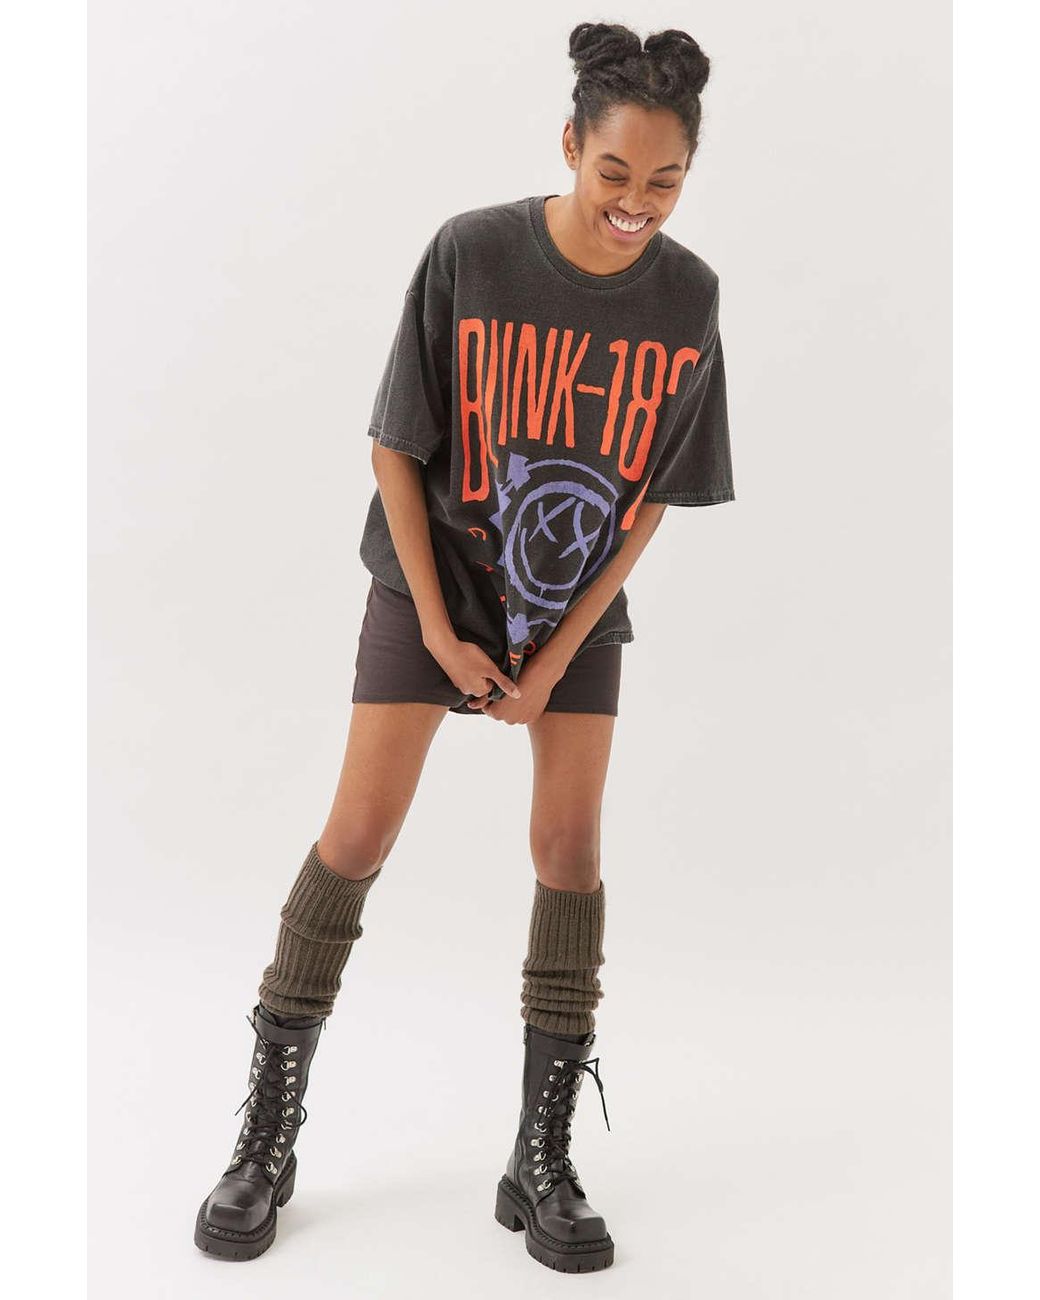 Urban Outfitters Blink 182 T-shirt Dress in Black | Lyst